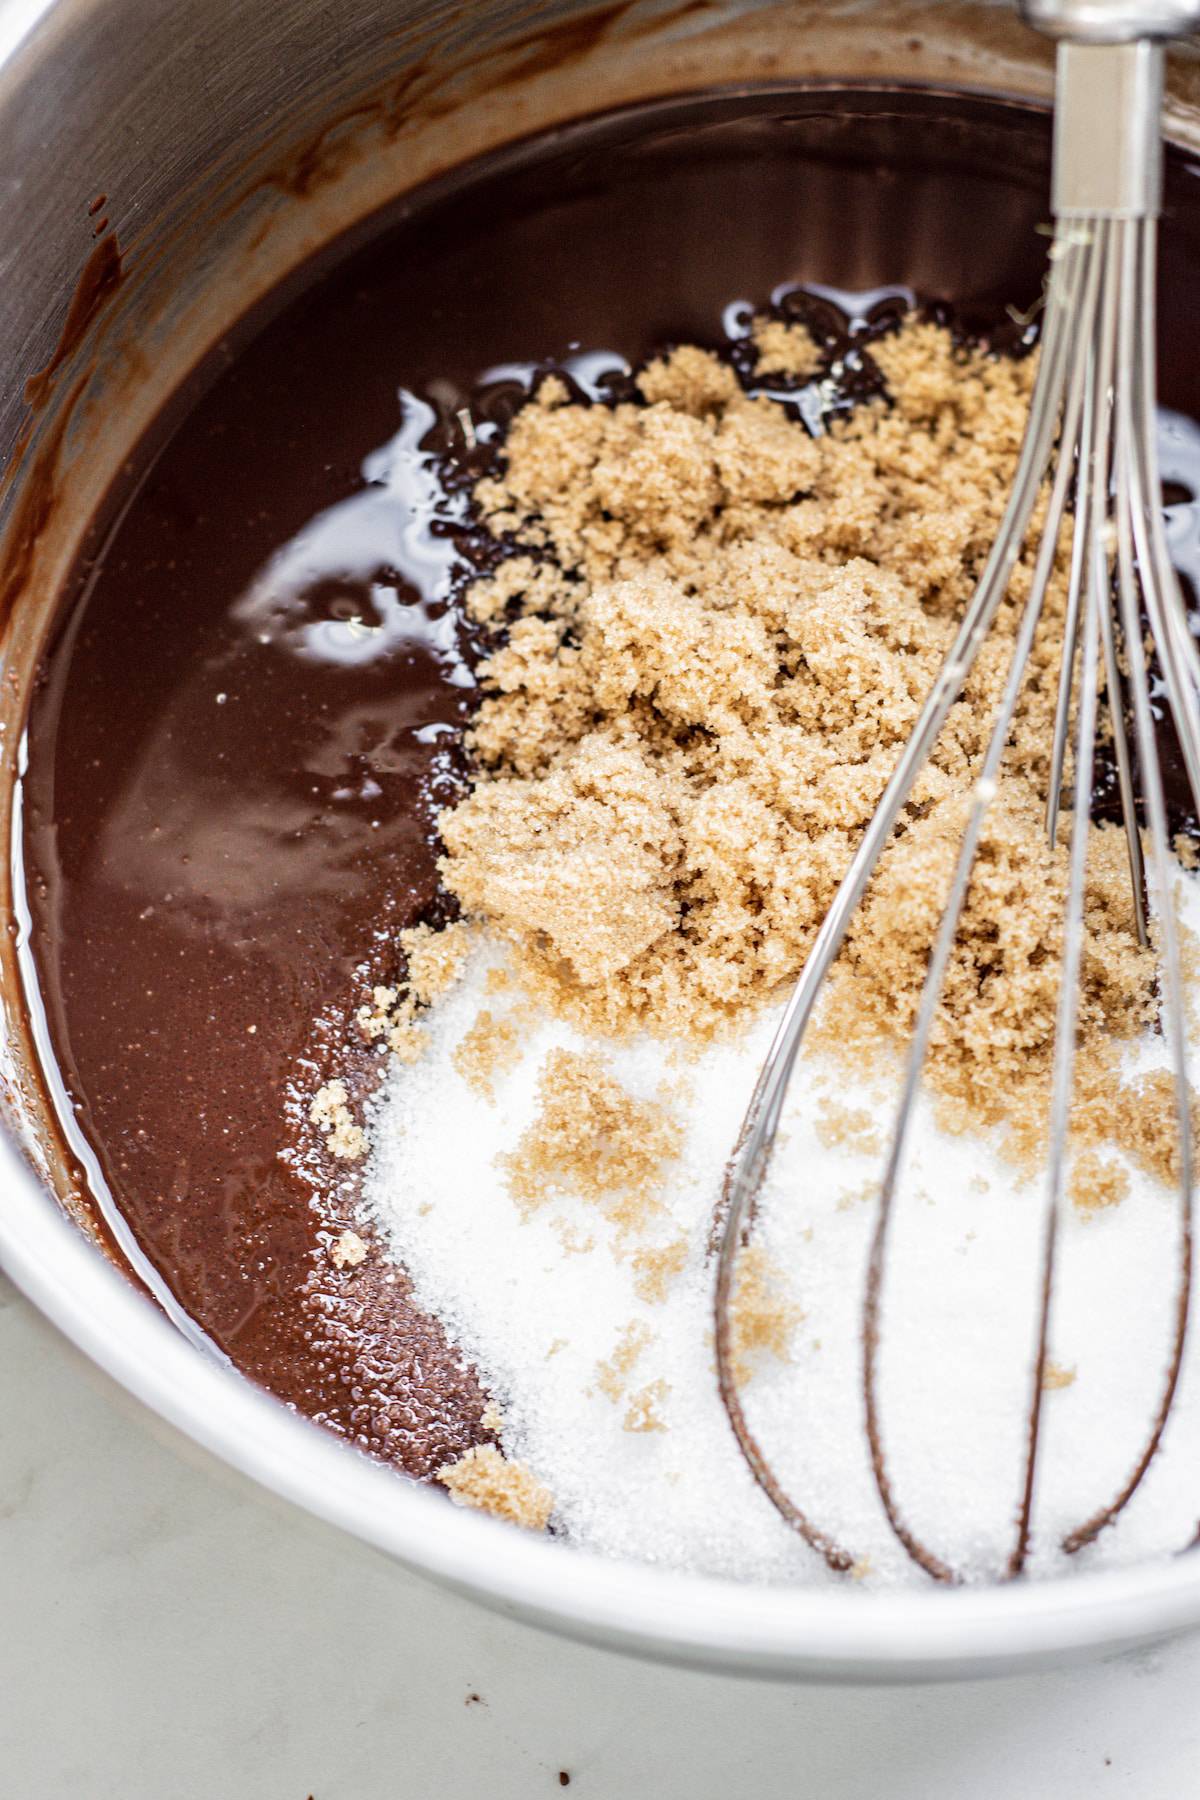 a bowl of chocolate and sugar.